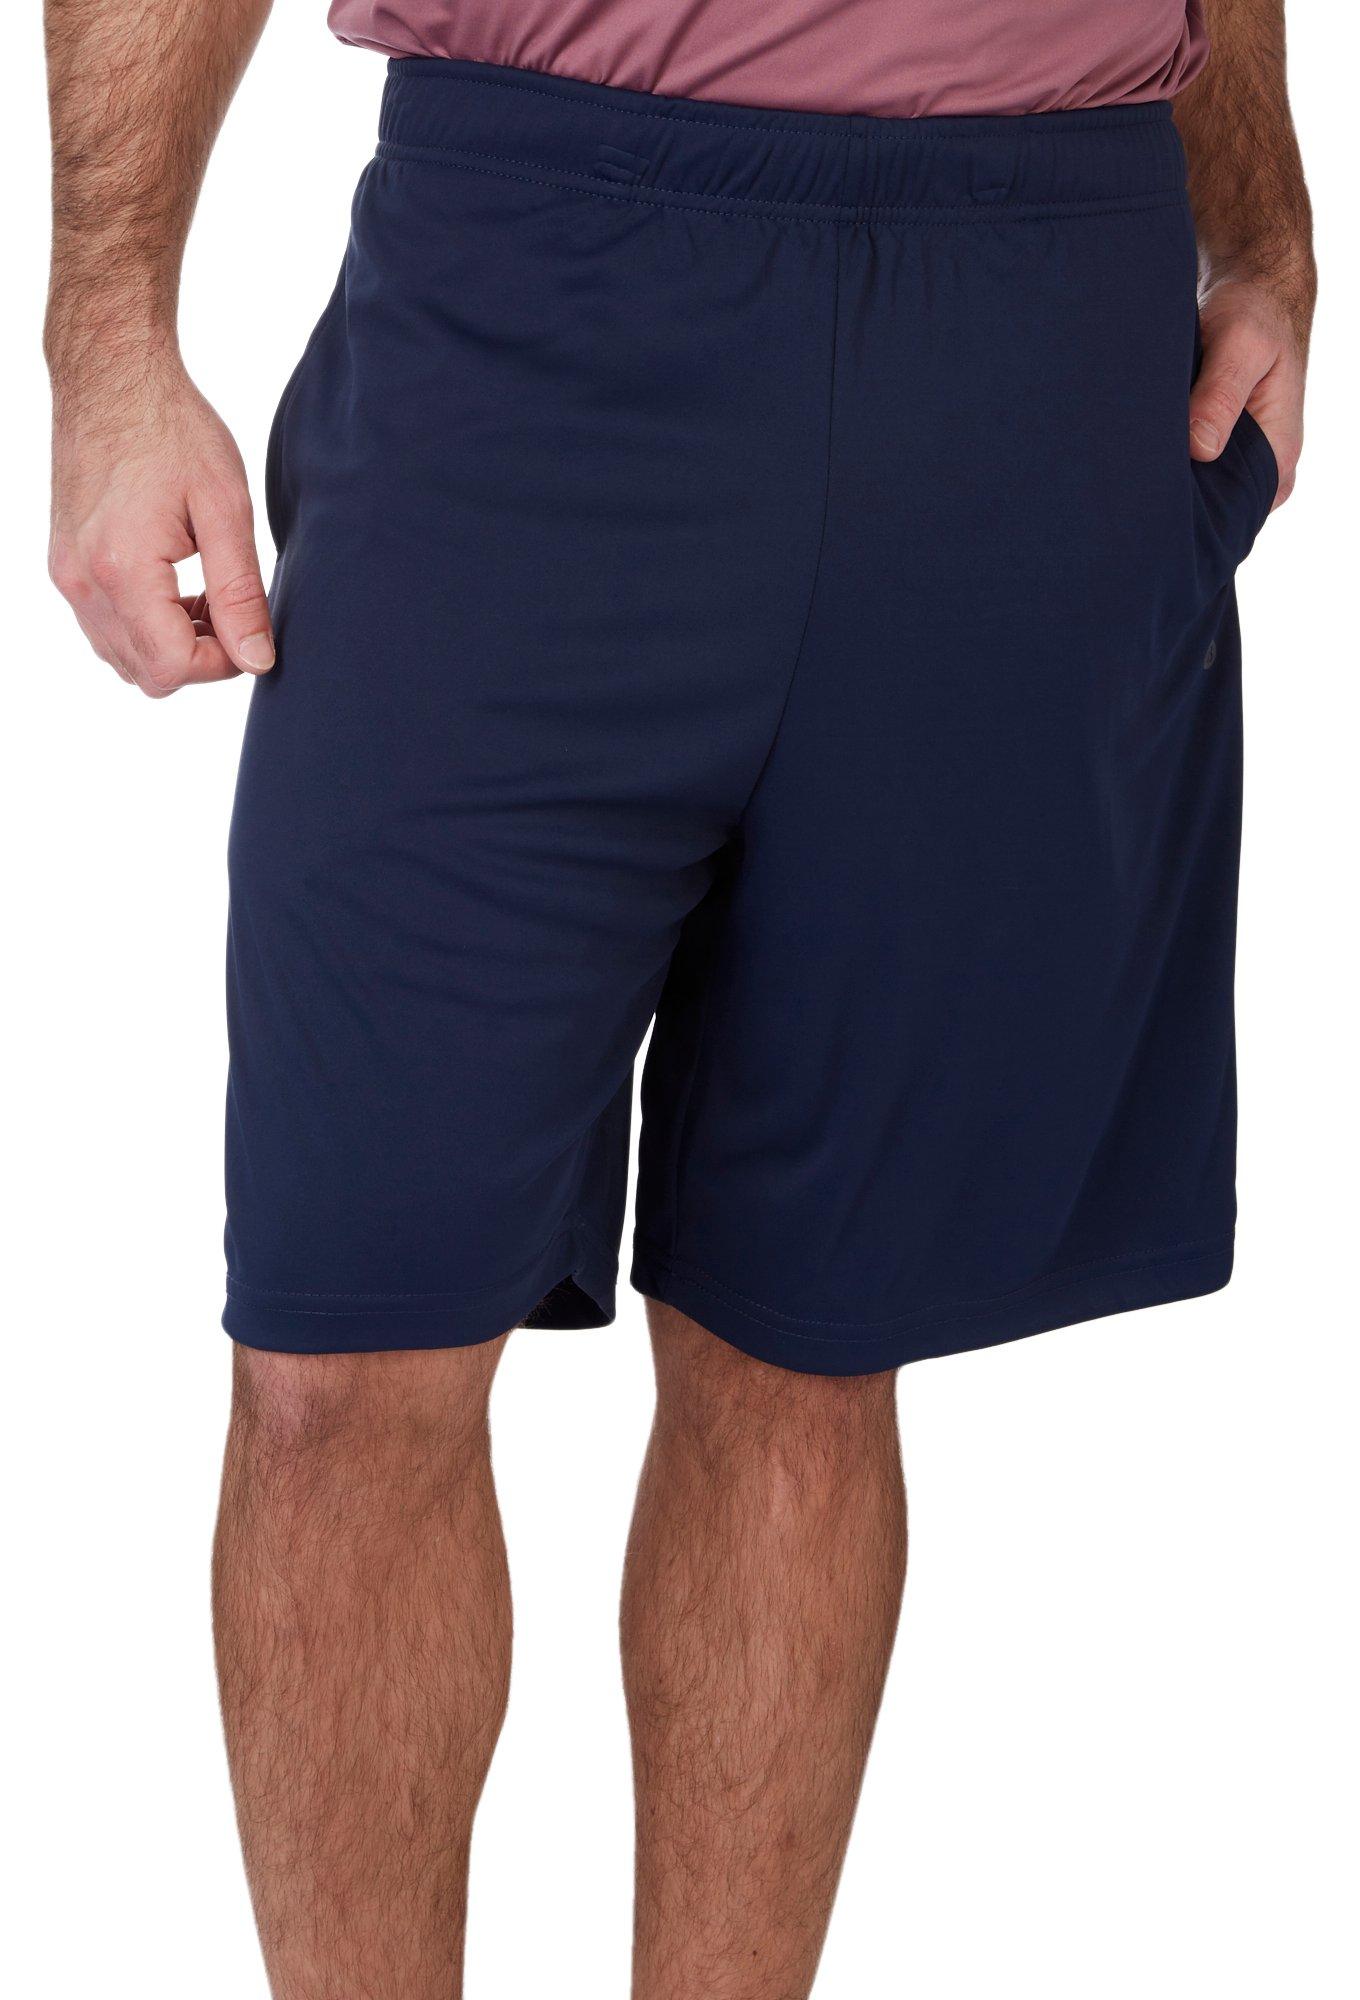 RB3 Mens Crossover Athletic Shorts